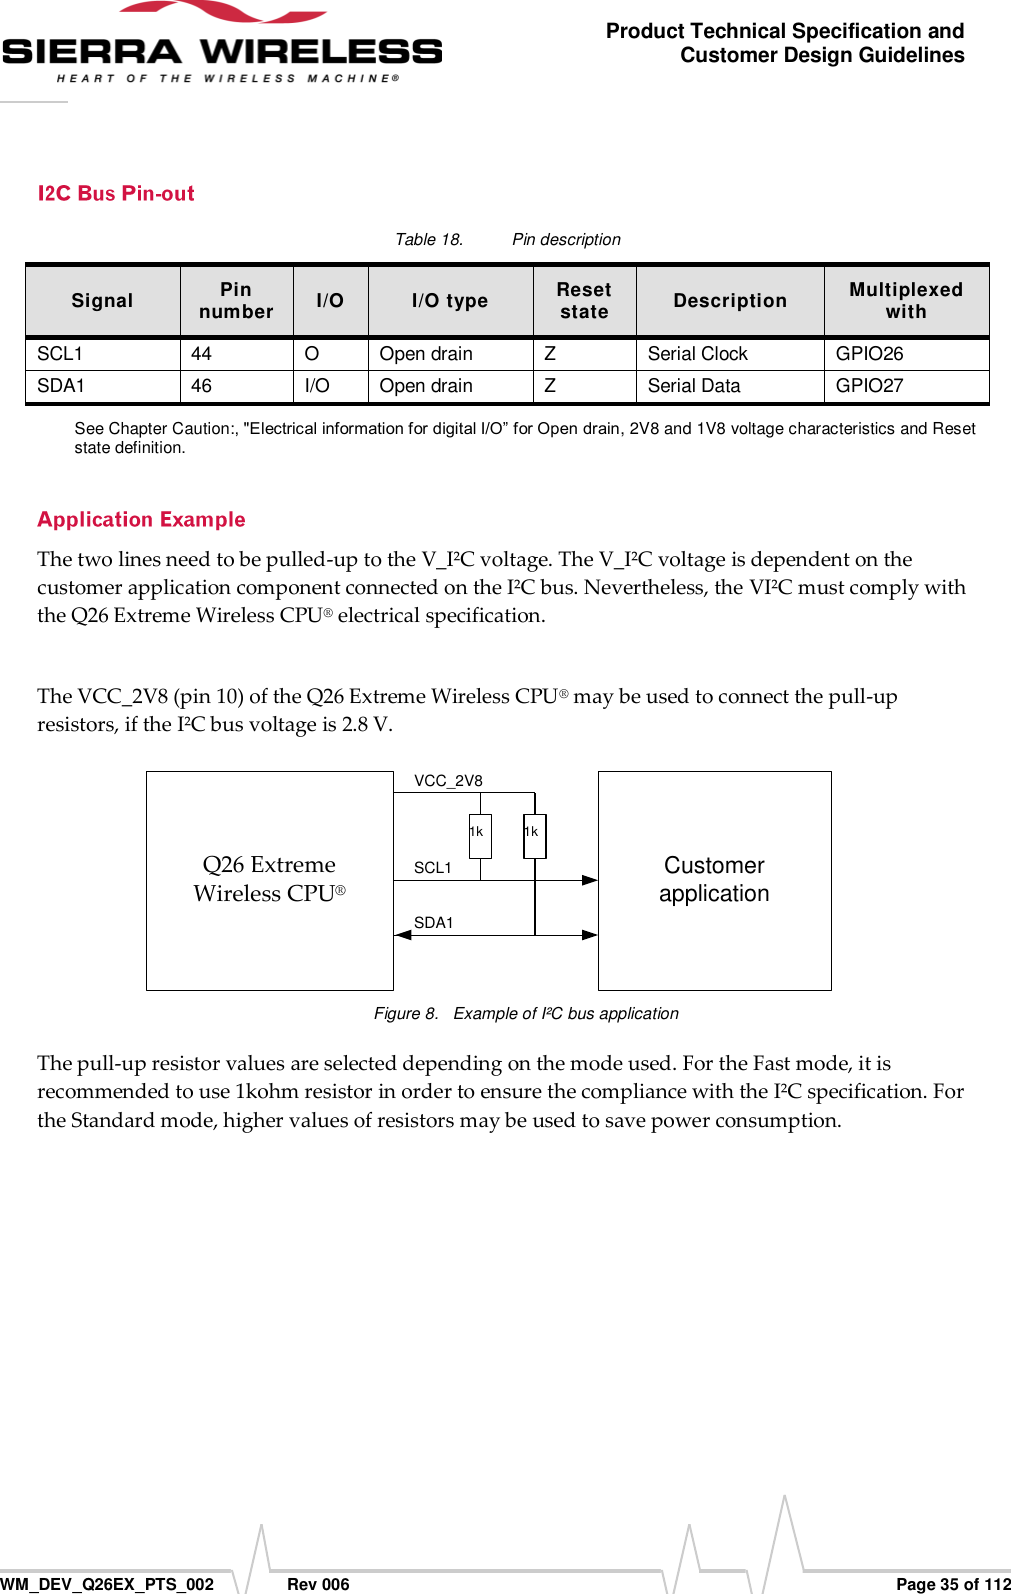      WM_DEV_Q26EX_PTS_002  Rev 006  Page 35 of 112 Product Technical Specification and Customer Design Guidelines Table 18.  Pin description Signal Pin number I/O I/O type Reset state Description Multiplexed with SCL1 44 O Open drain Z Serial Clock GPIO26 SDA1 46 I/O Open drain Z Serial Data GPIO27 See Chapter Caution:, &quot;Electrical information for digital I/O” for Open drain, 2V8 and 1V8 voltage characteristics and Reset state definition. The two lines need to be pulled-up to the V_I²C voltage. The V_I²C voltage is dependent on the customer application component connected on the I²C bus. Nevertheless, the VI²C must comply with the Q26 Extreme Wireless CPU® electrical specification.   The VCC_2V8 (pin 10) of the Q26 Extreme Wireless CPU® may be used to connect the pull-up resistors, if the I²C bus voltage is 2.8 V. Customer applicationQ26 ExtremeWireless CPU®SDA1SCL11k 1kVCC_2V8 Figure 8.  Example of I²C bus application The pull-up resistor values are selected depending on the mode used. For the Fast mode, it is recommended to use 1kohm resistor in order to ensure the compliance with the I²C specification. For the Standard mode, higher values of resistors may be used to save power consumption. 